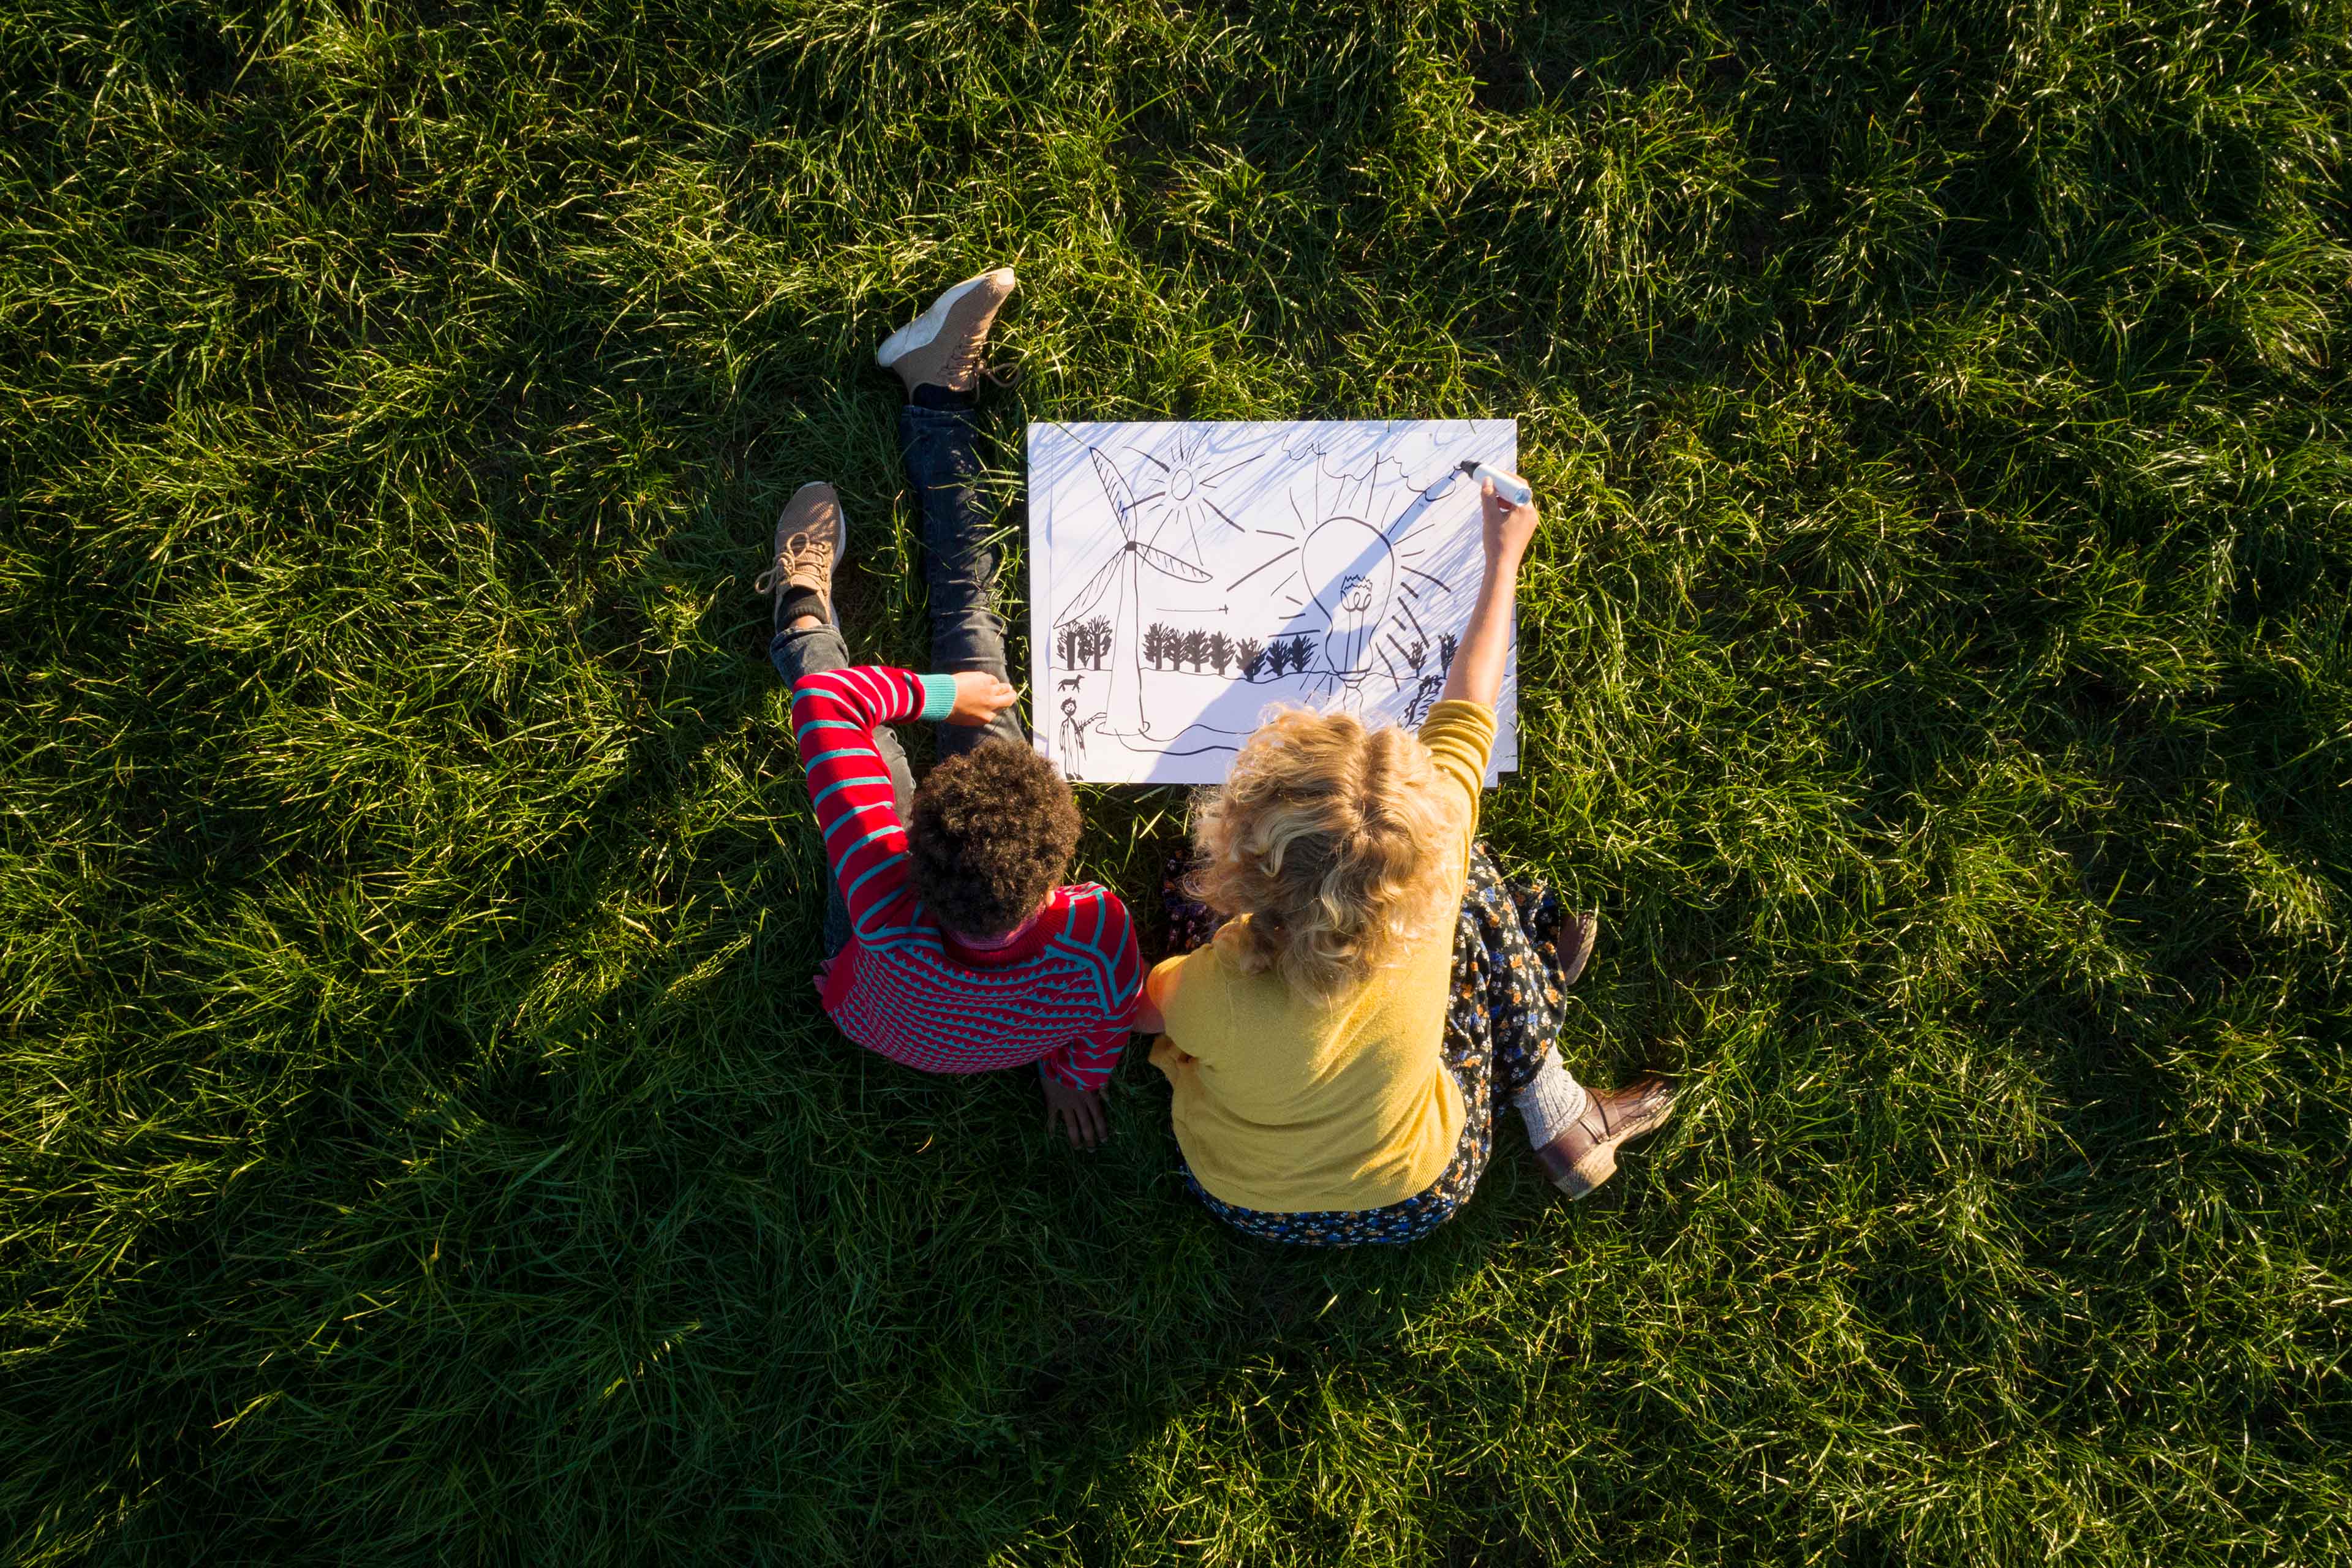 Boy and girl on grass drawing sustainable energy solution